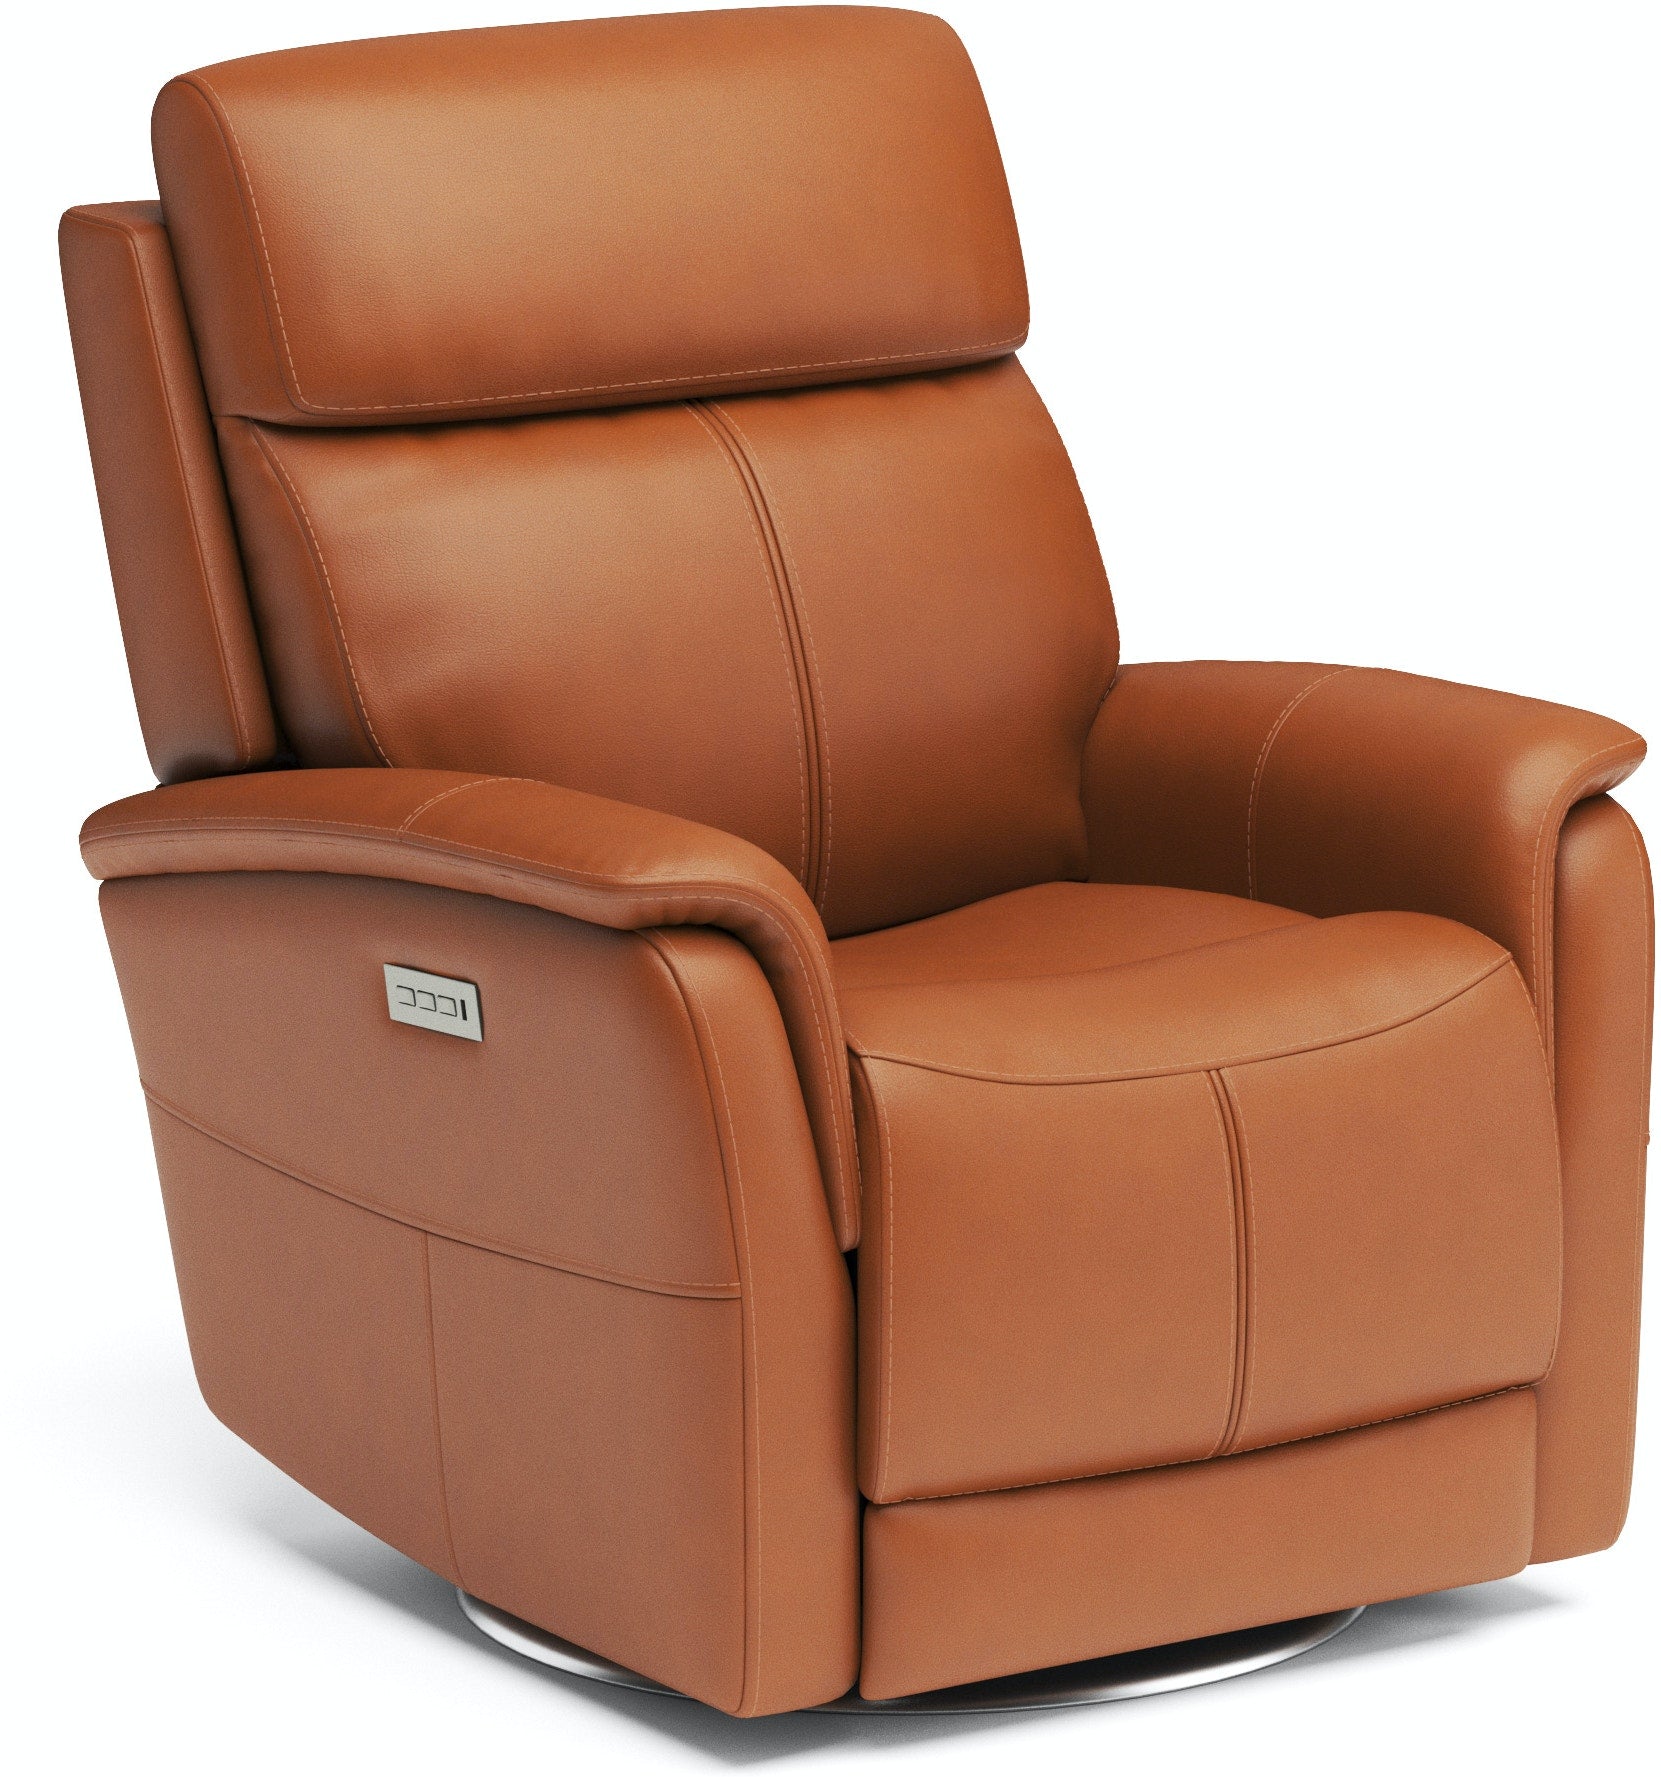 View Swivel Power Recliner in Saddle